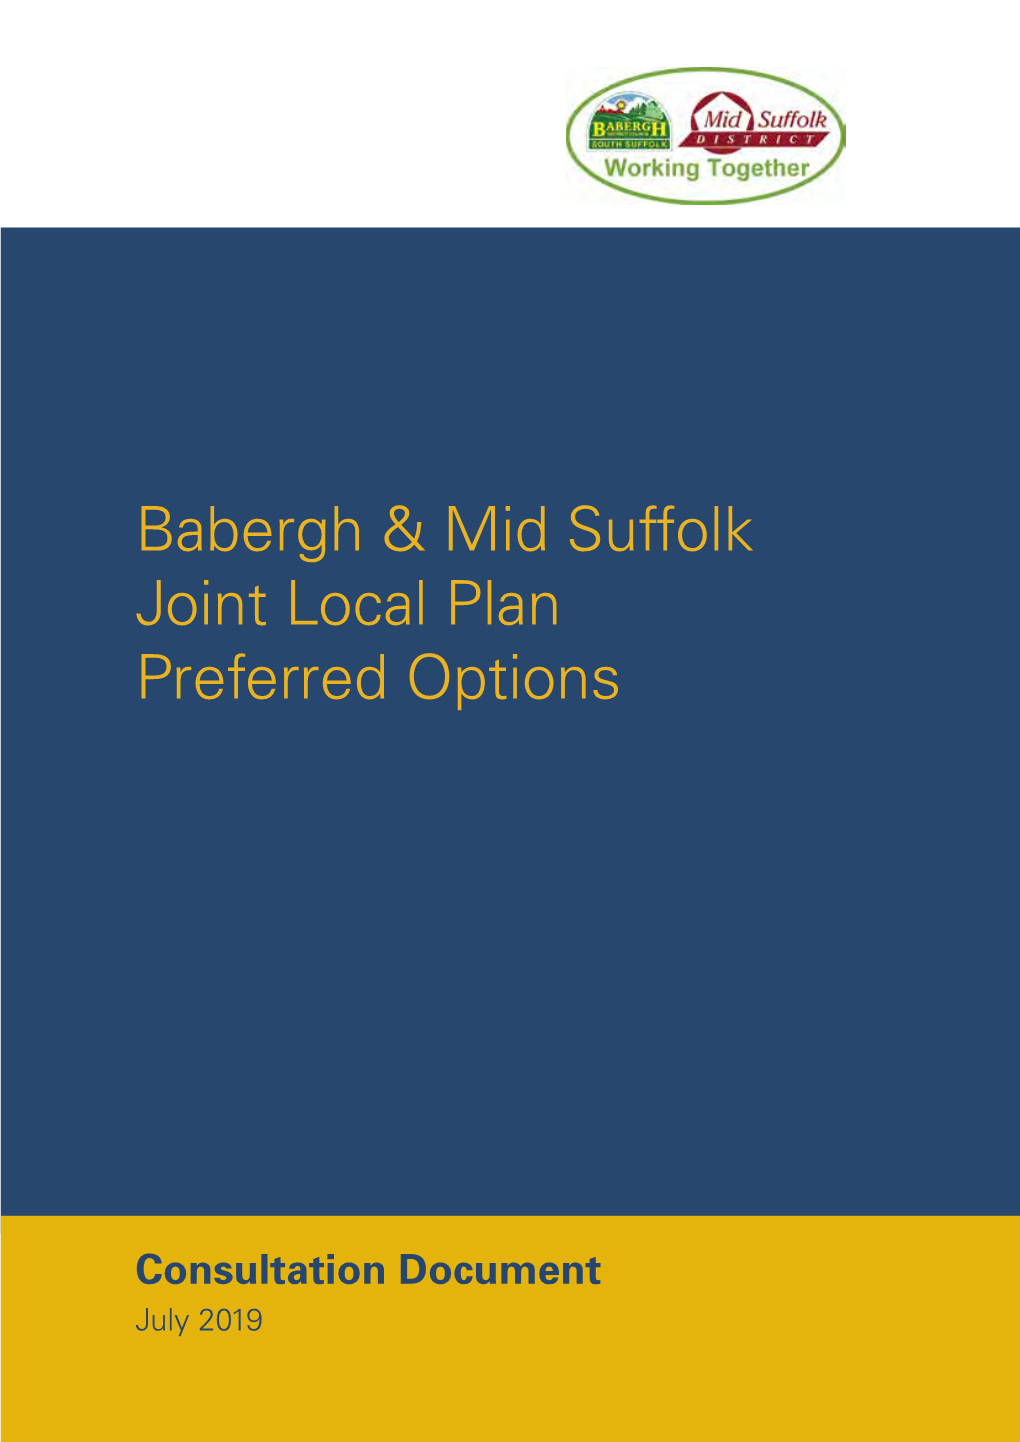 Babergh & Mid Suffolk Joint Local Plan Preferred Options